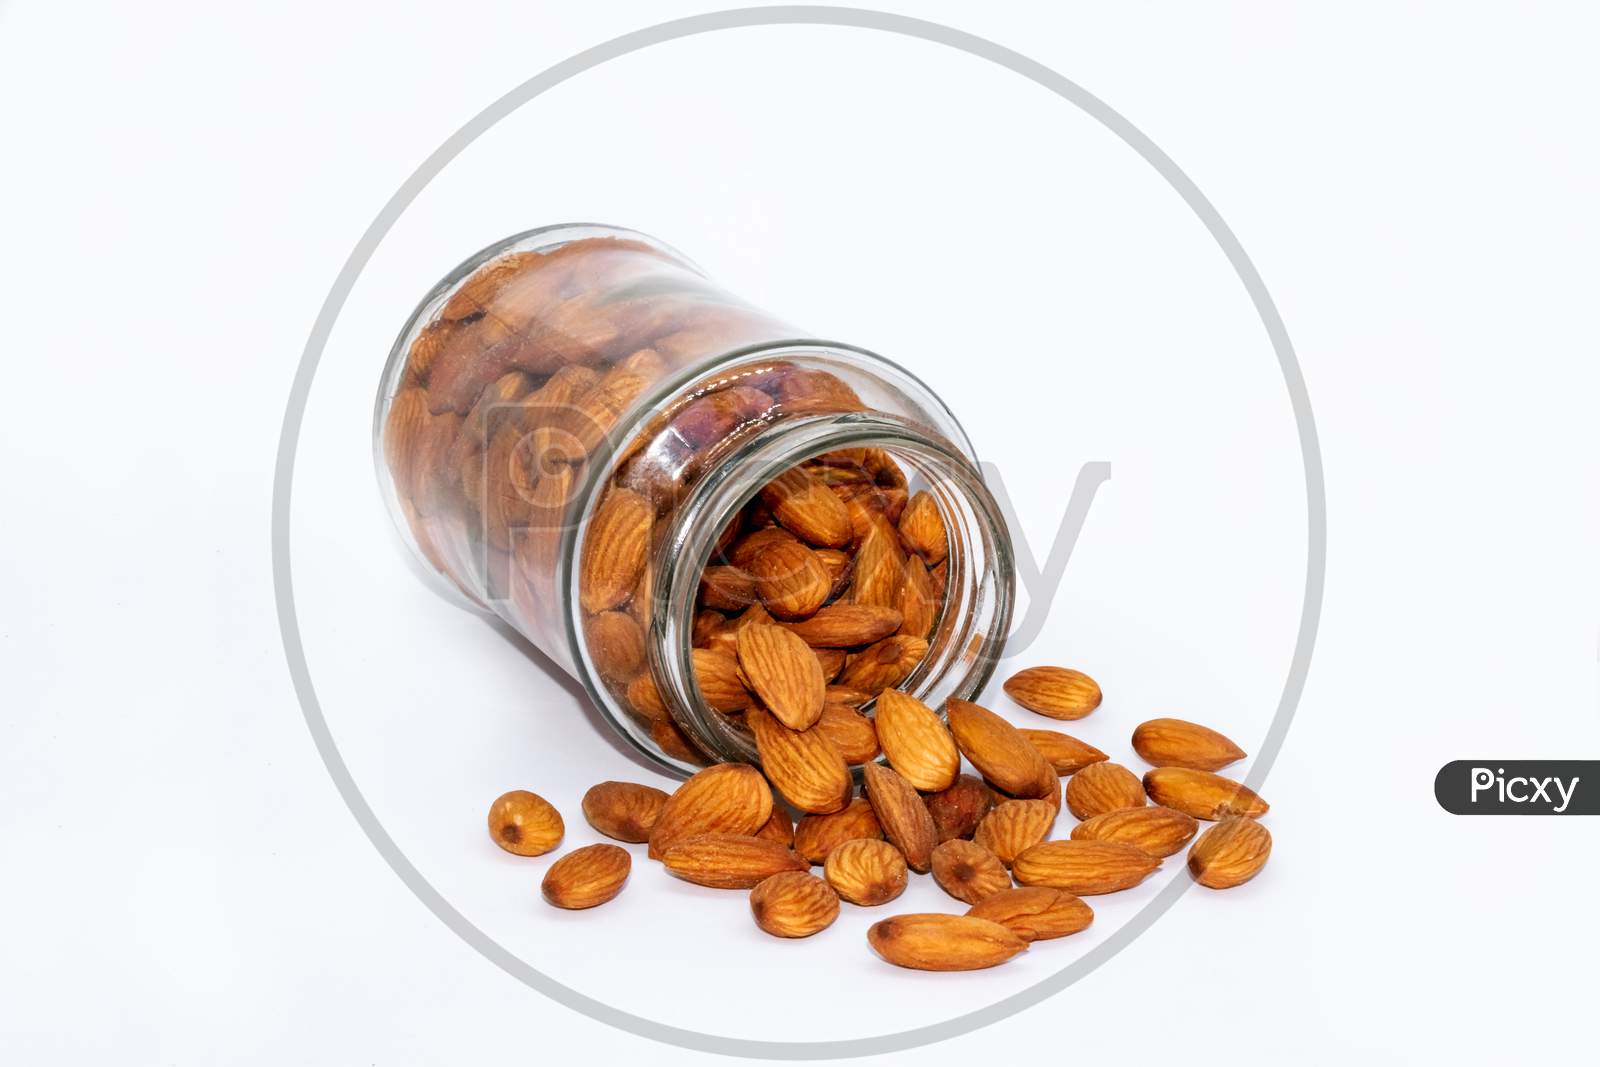 Almond nuts scatters from glass jar